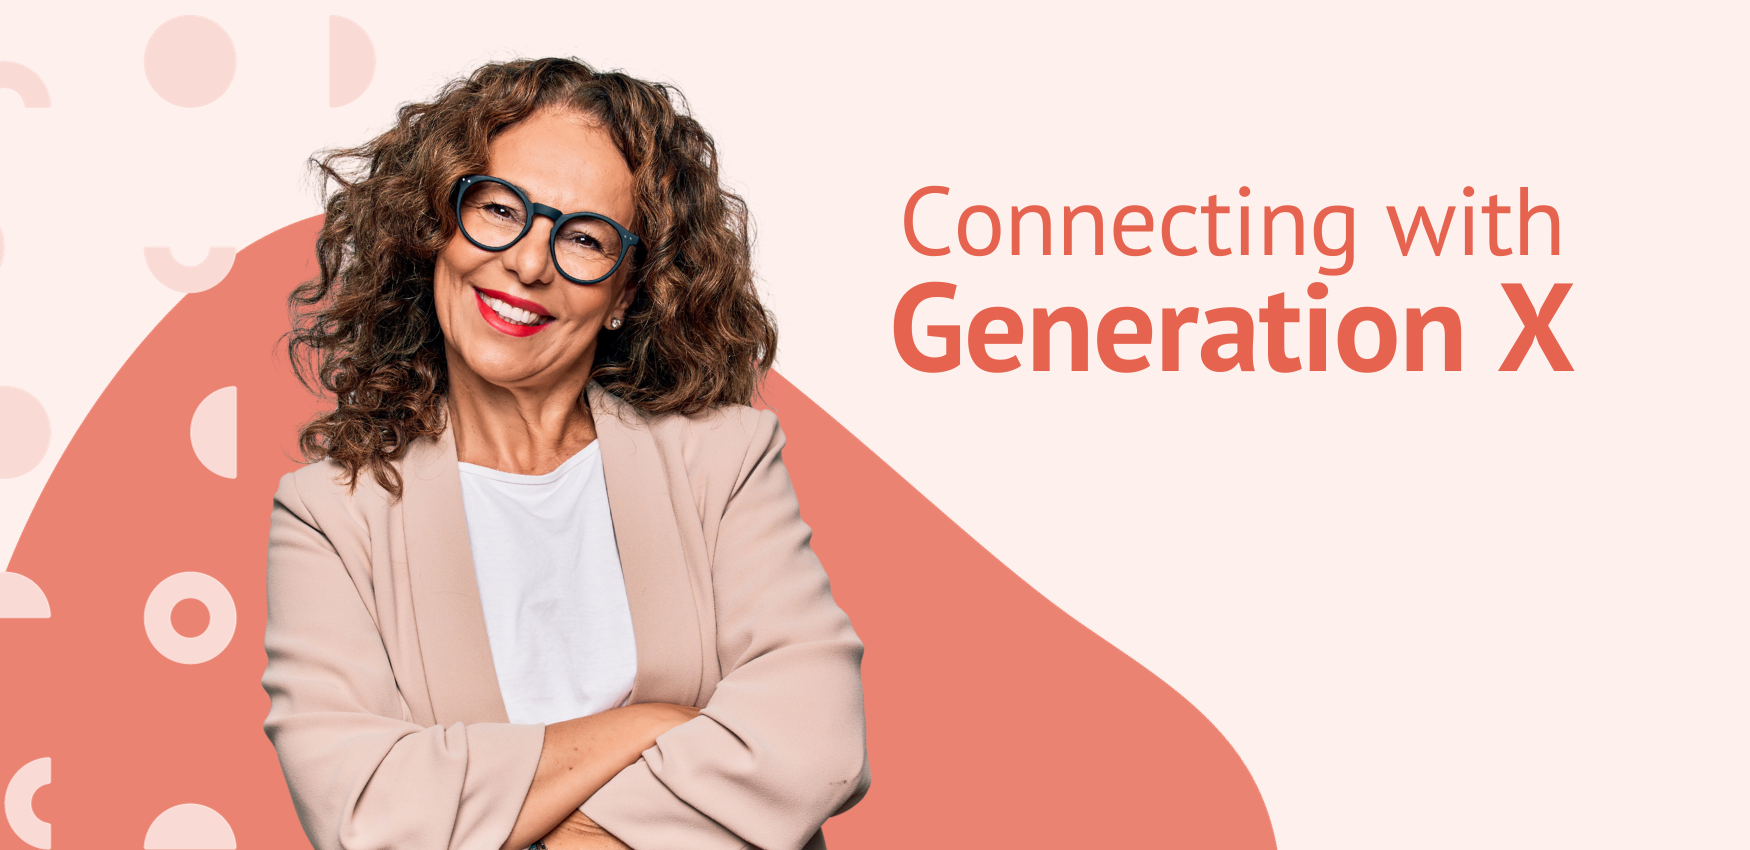 3 Technologies to Help You Connect with Generation X